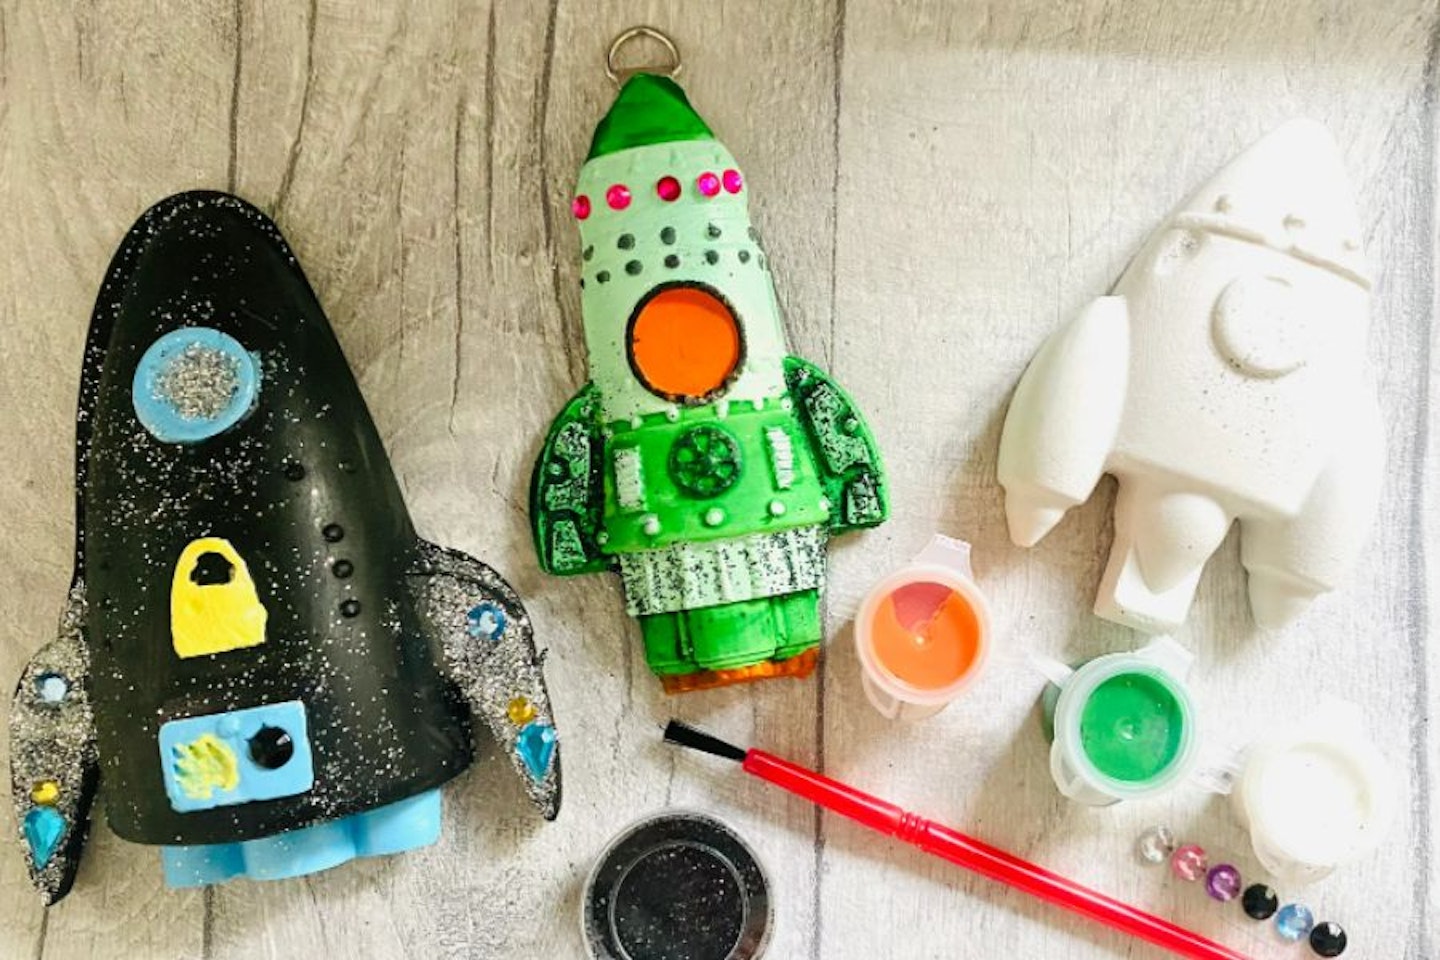 Space party ideas - CraftCabinPartyShop Space Theme Party Bag-Planets Craft Kit 